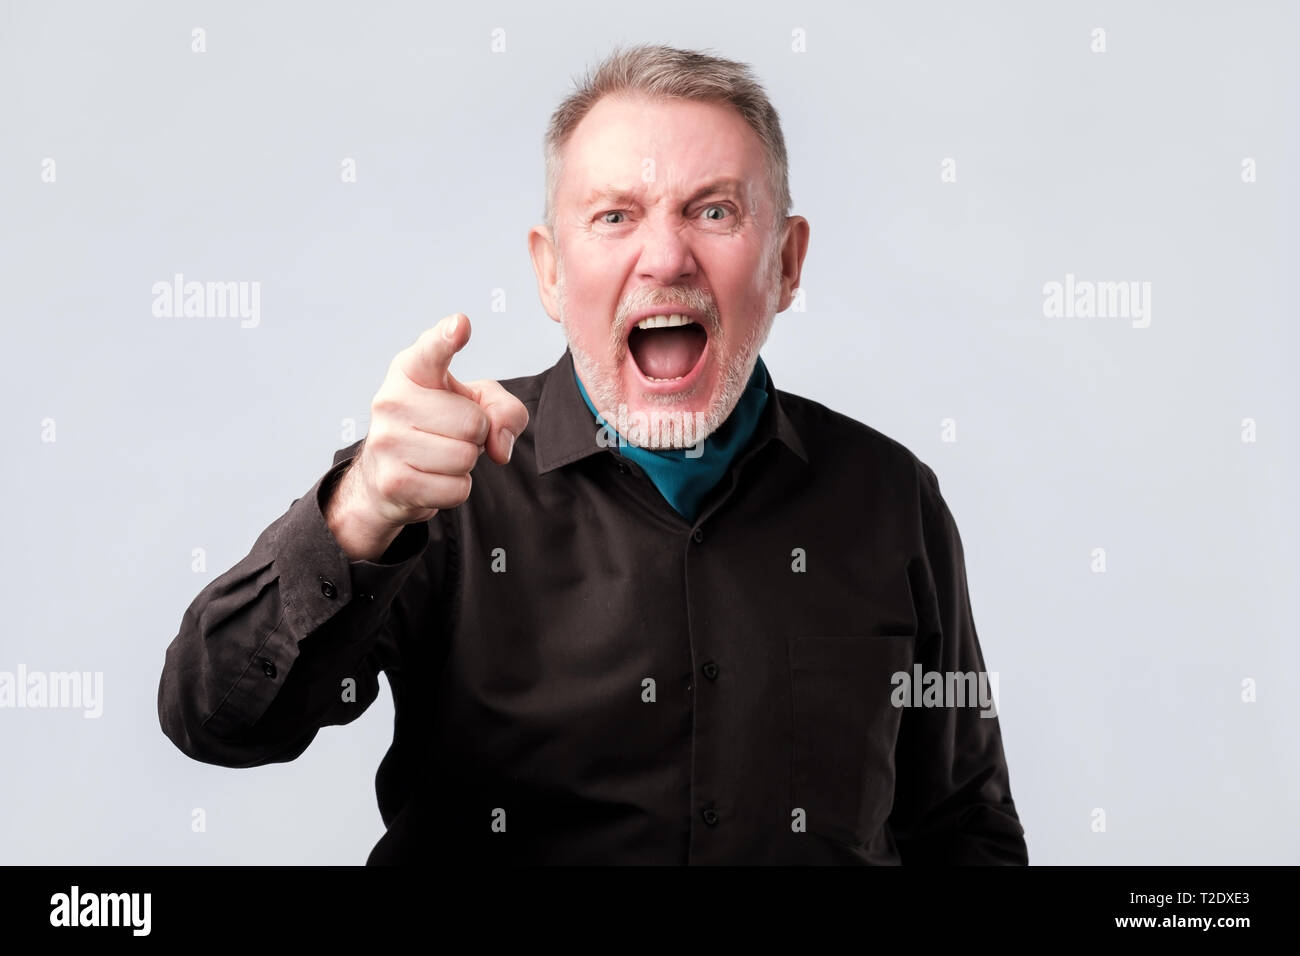 Angry man screaming, pointing his index finger directly at you. Father accuses child of doing the wrong thing. negative facial emotion. Stock Photo